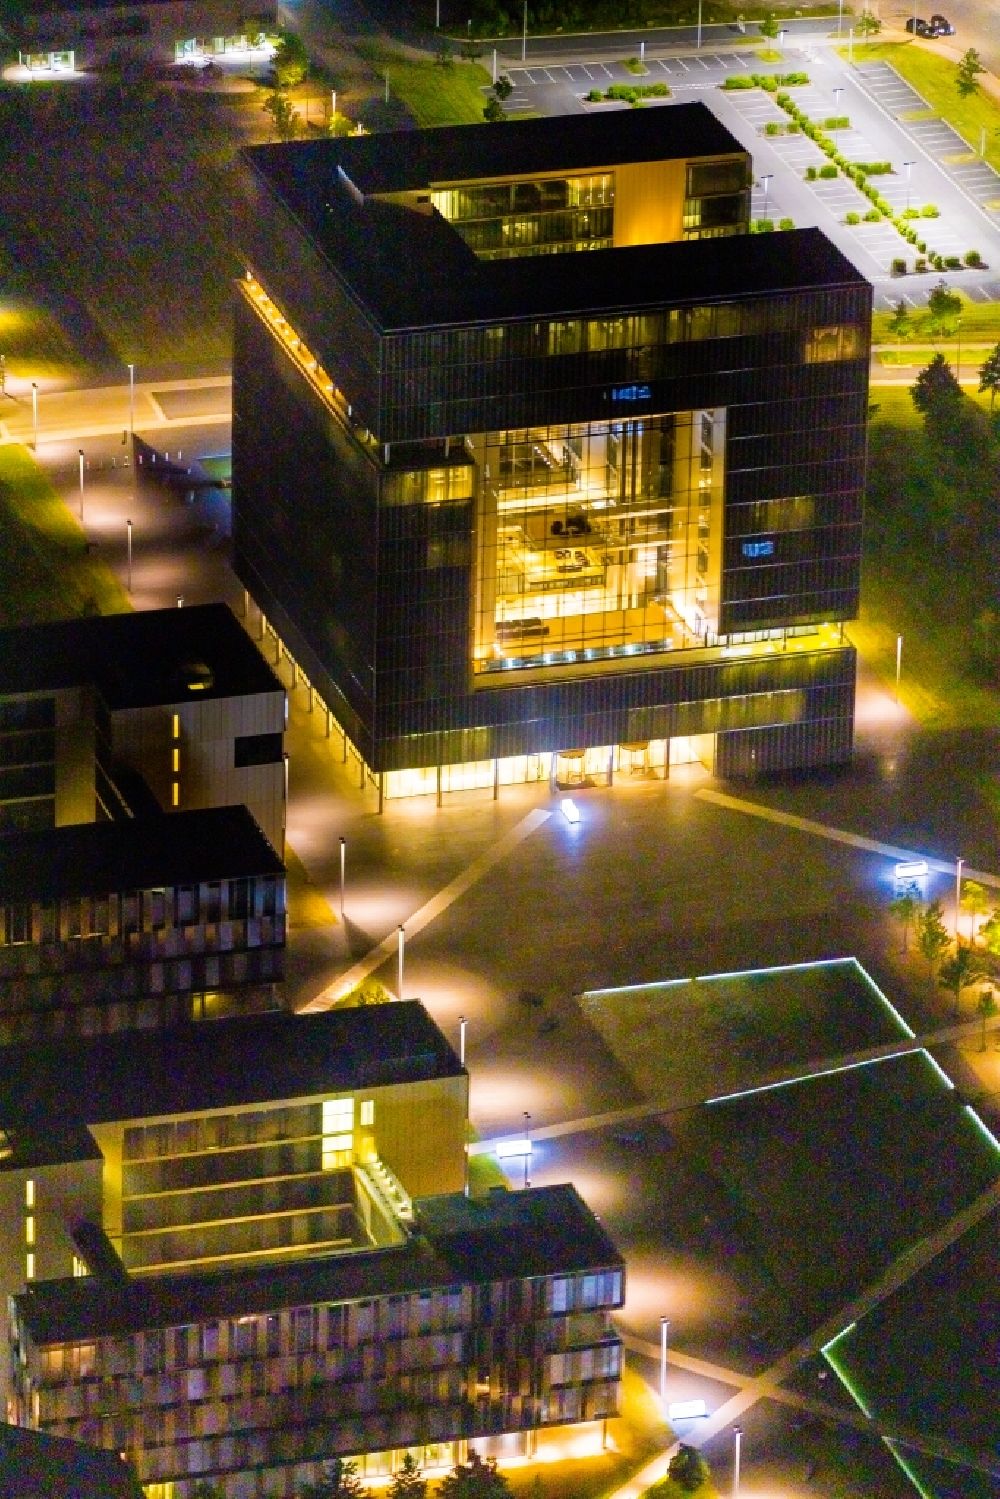 Essen at night from the bird perspective: Night lighting administration building of the company of Thyssenkrupp AG Building ensemble Krupp - Guertel in Krupp Park on Altendorfer Strasse at the corner of Berthold-Beitz-Boulevard in the district Westviertel in Essen at Ruhrgebiet in the state North Rhine-Westphalia, Germany